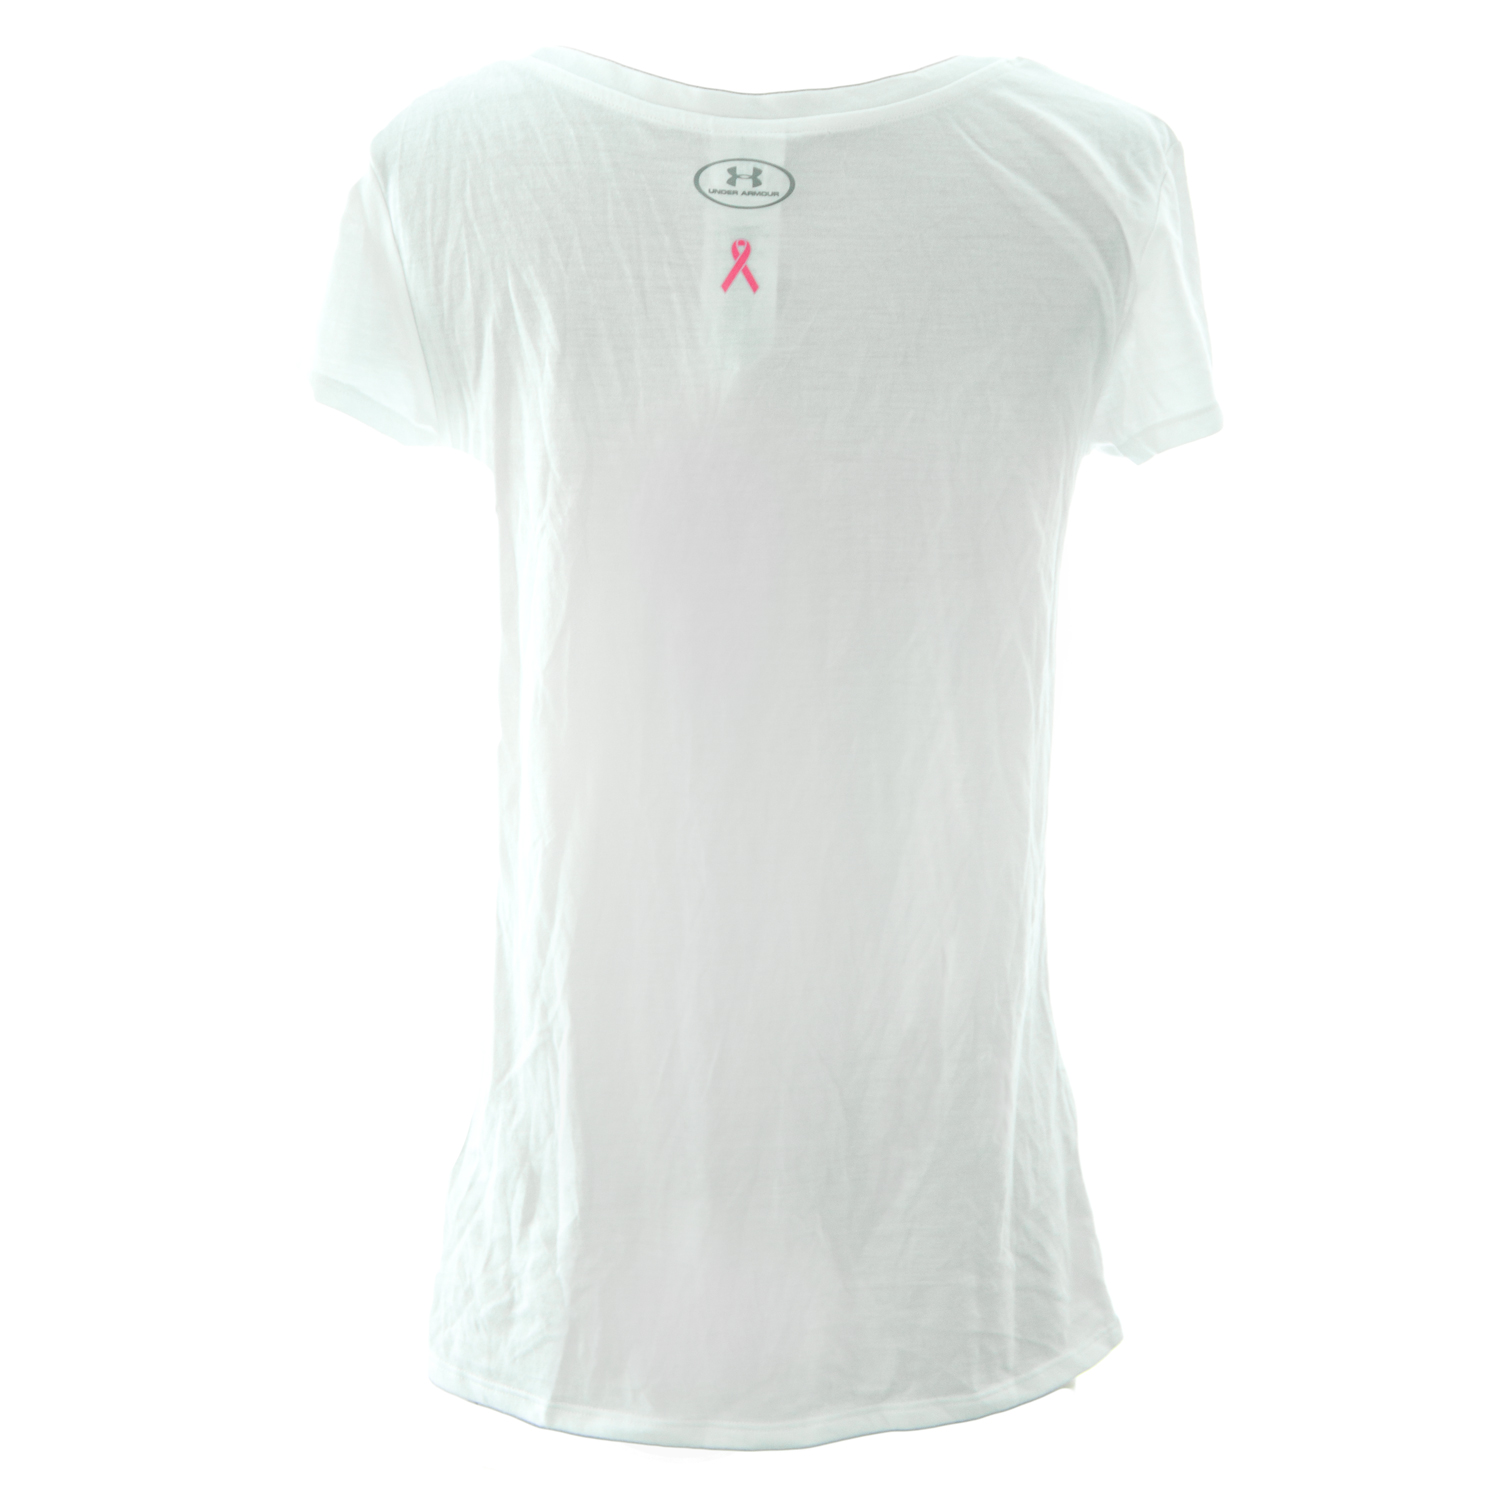 Under Armour Women's Power in Pink "I Fight For" T-Shirt Medium White - image 2 of 2